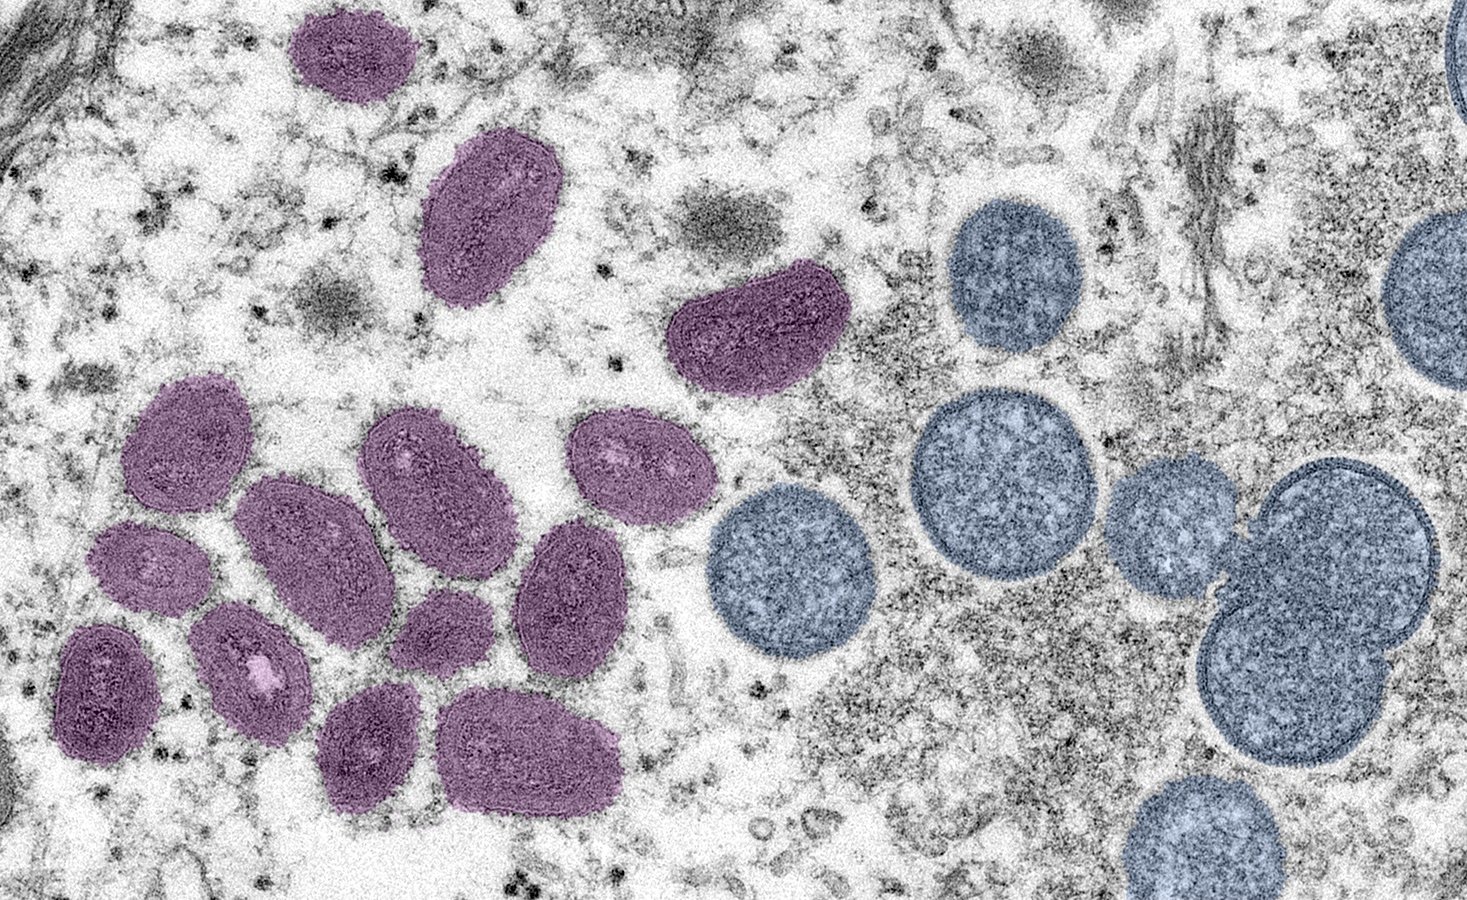 is digitally-colorized electron microscopic image depicts monkeypox virus particles, obtained from a clinical sample associated with the 2003 prairie dog outbreak.